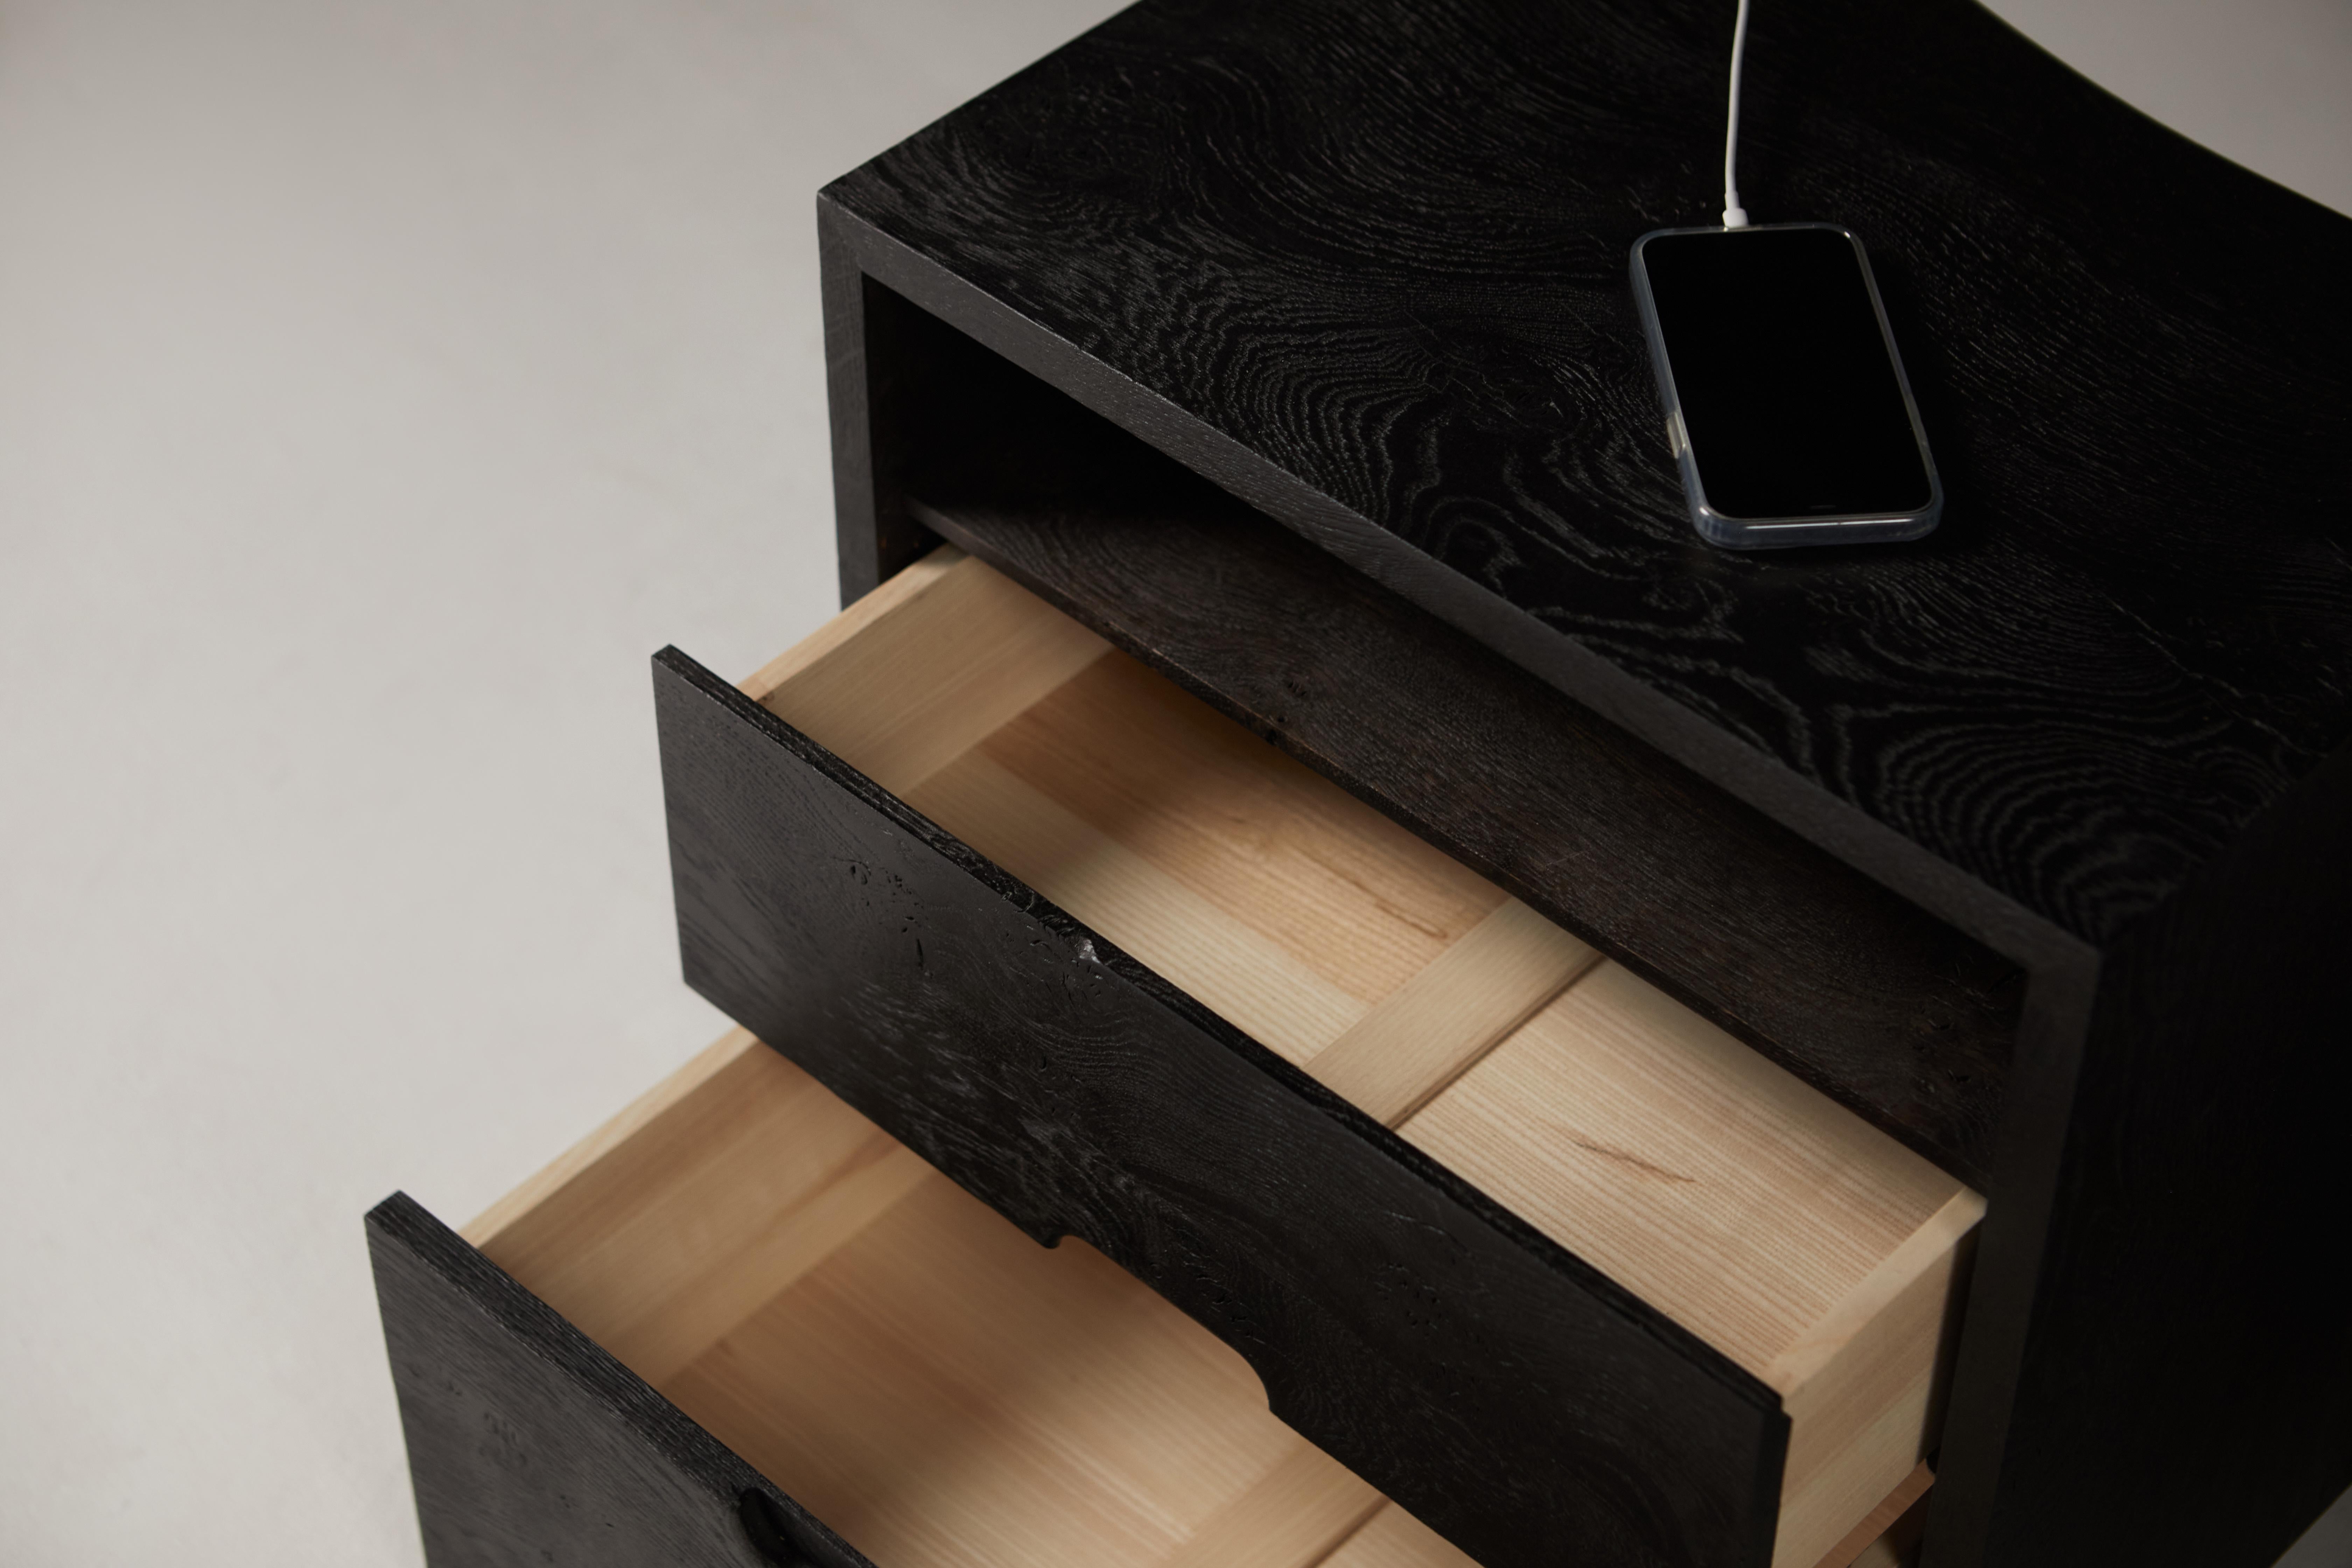 A pair of ebonized Bedside Tables in Solid English Oak.
The two drawer boxes are made in solid ash and run on fully extendable soft close runners. 
The external surfaces have been brushed to give texture, then ebonized and finished with a hard wax